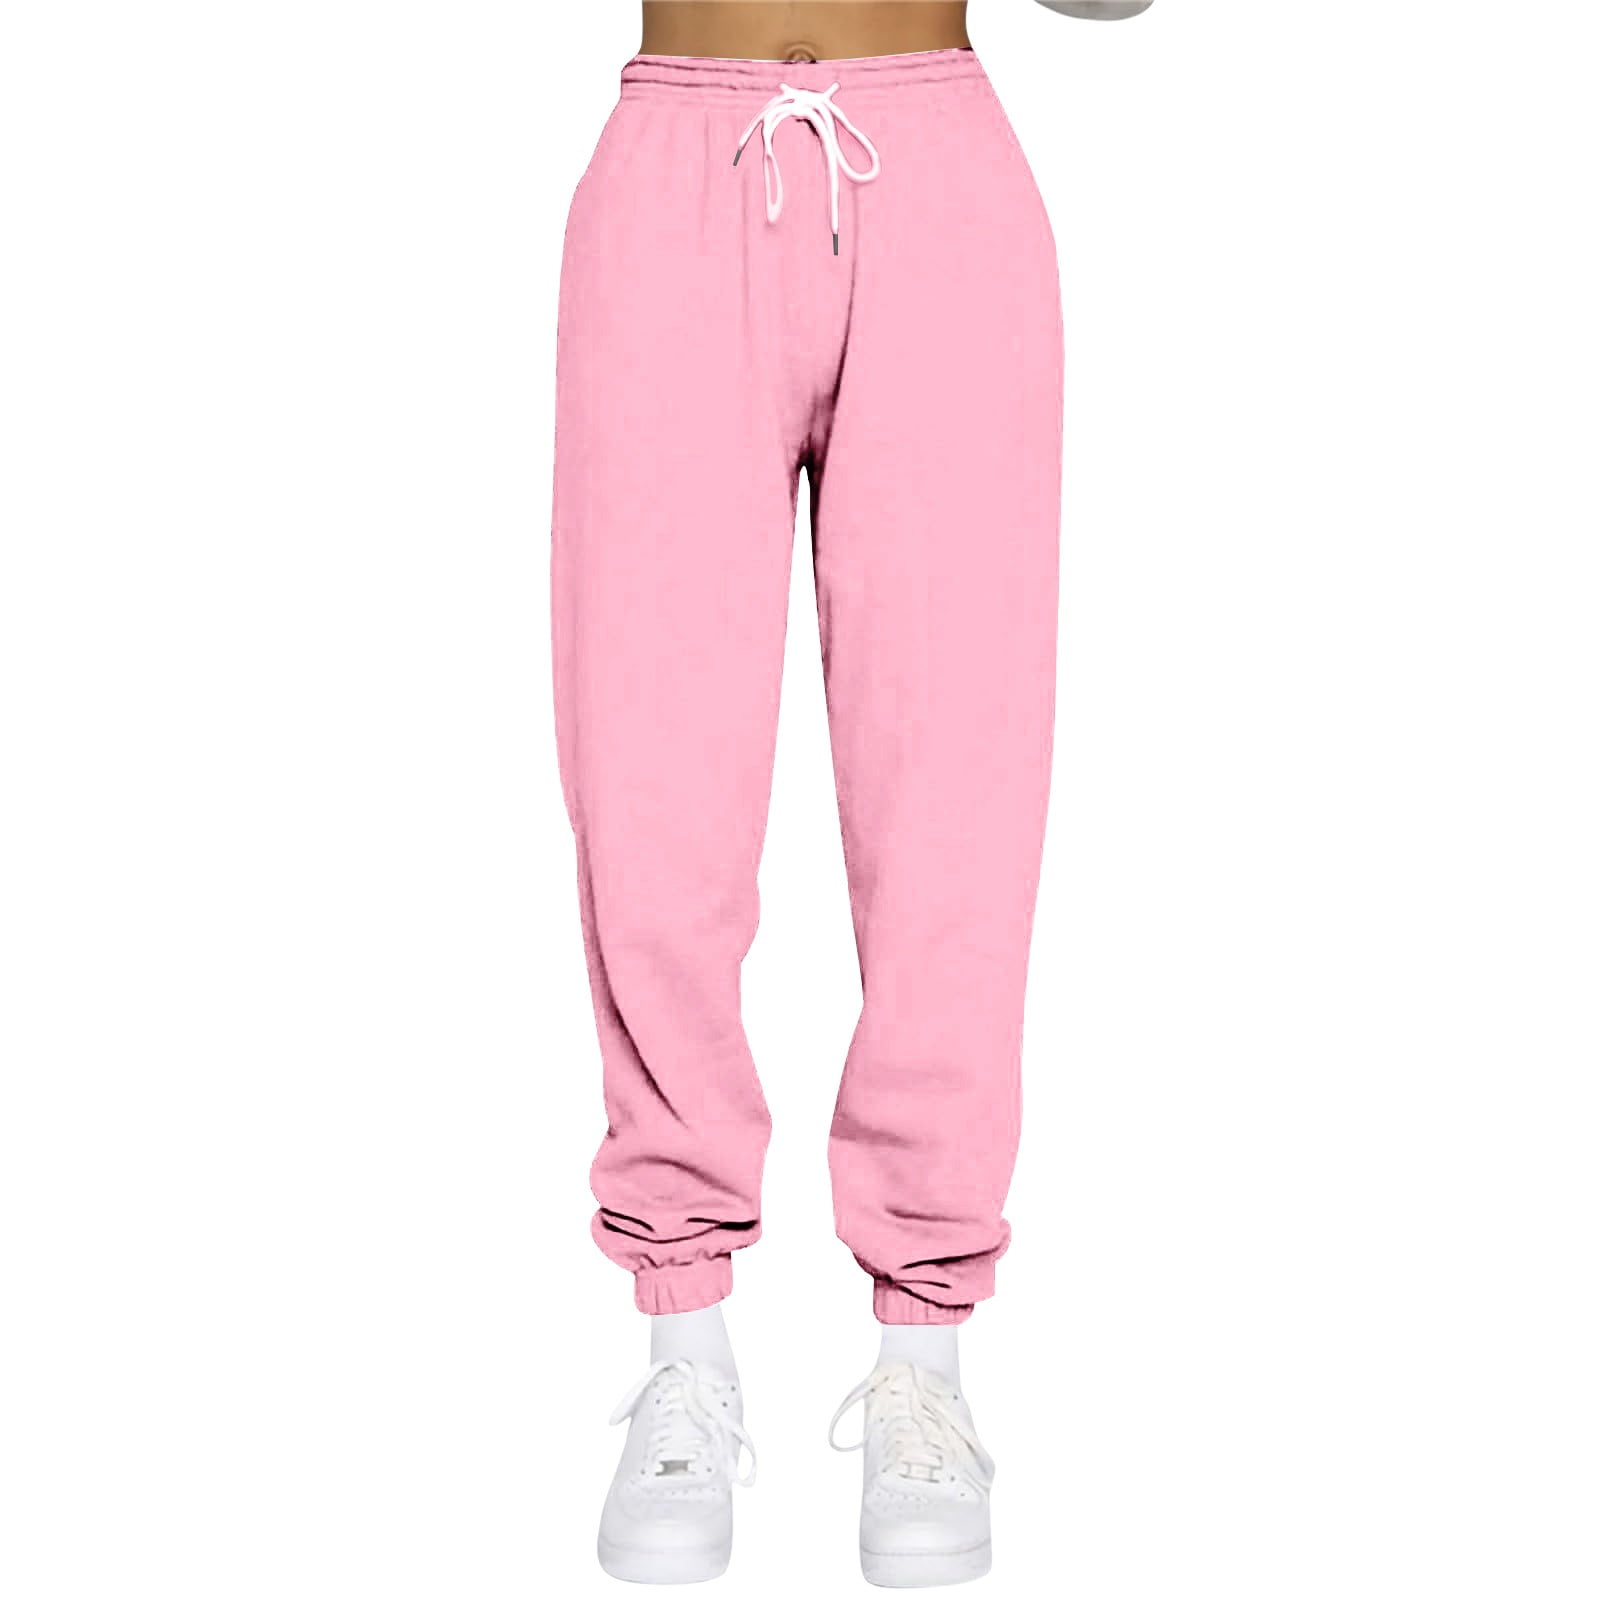 AUTOMET Women's Cinch Bottom Sweatpants High Waisted Athletic Joggers  Lounge Pants with Pockets 